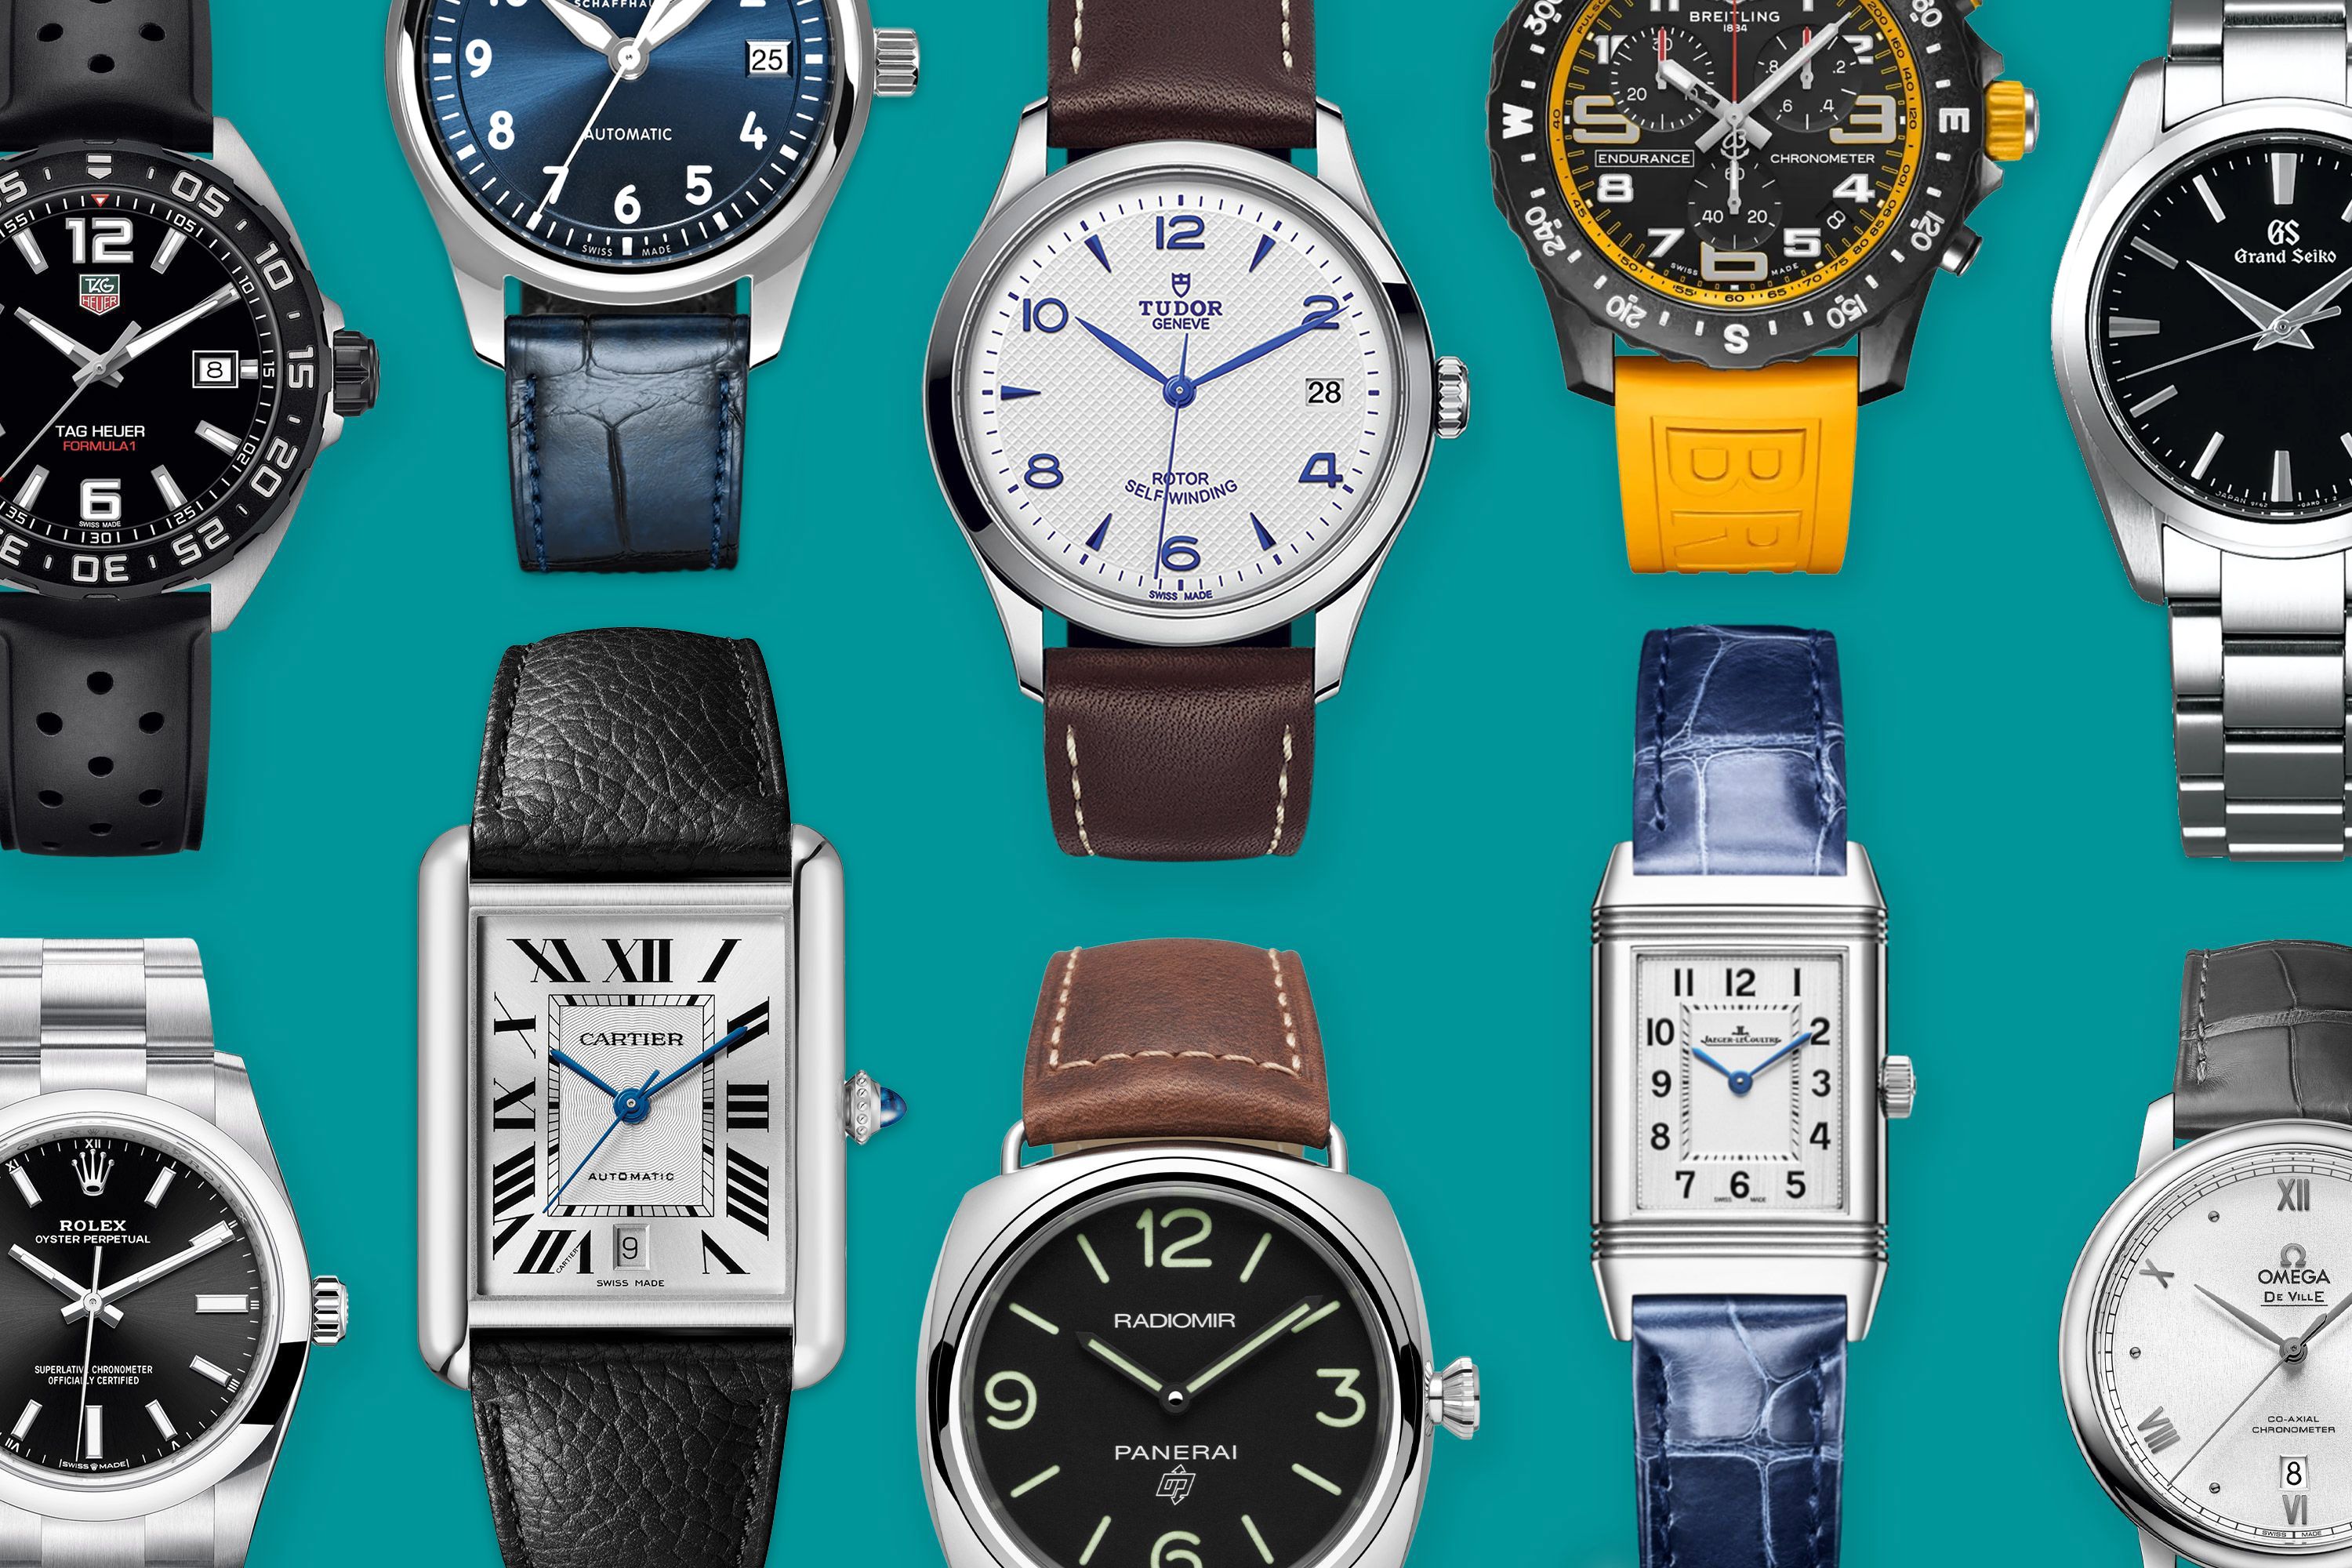 Recyclen Zachtmoedigheid Malaise These Are the Entry-Level Watches From 10 Great Luxury Watch Brands